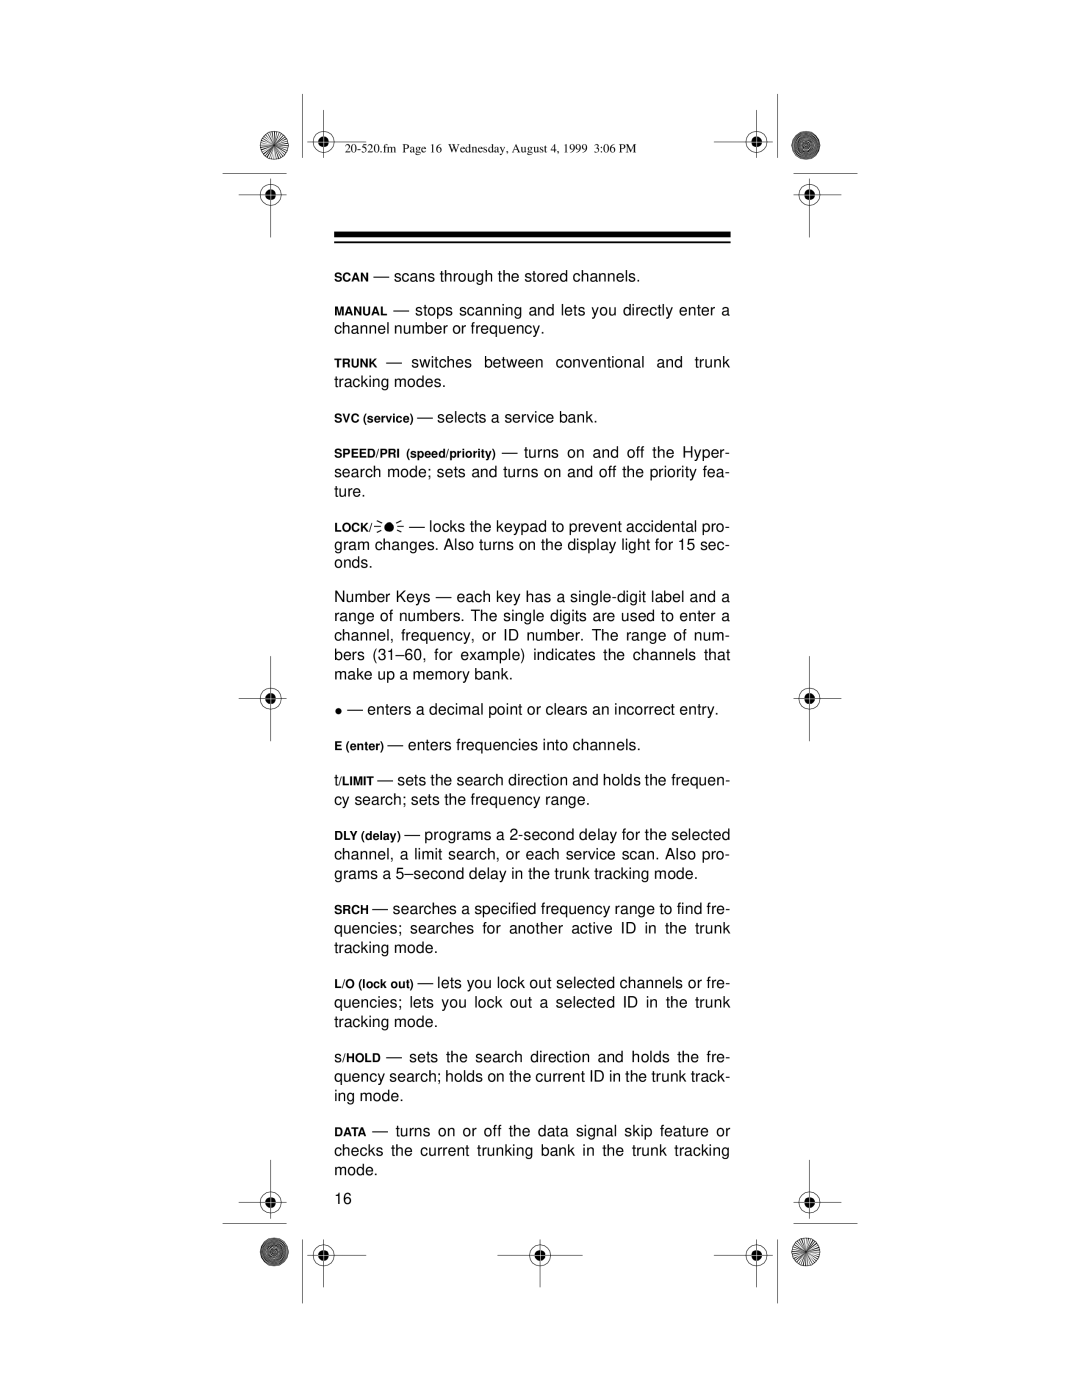 Radio Shack PRO-90 owner manual SCAN - scans through the stored channels 